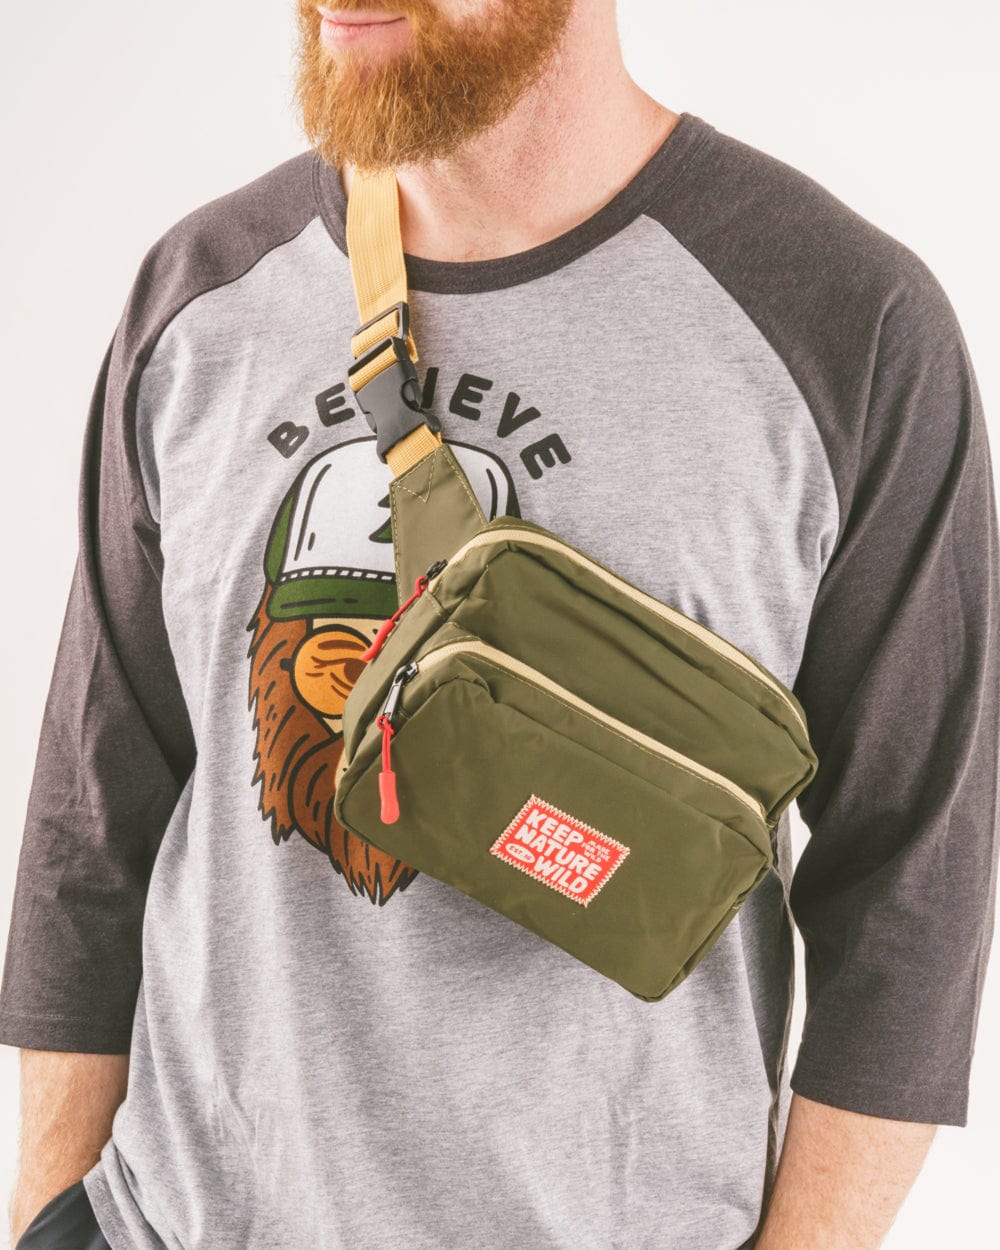 Keep Nature Wild Fanny Pack Adventure Fanny Pack